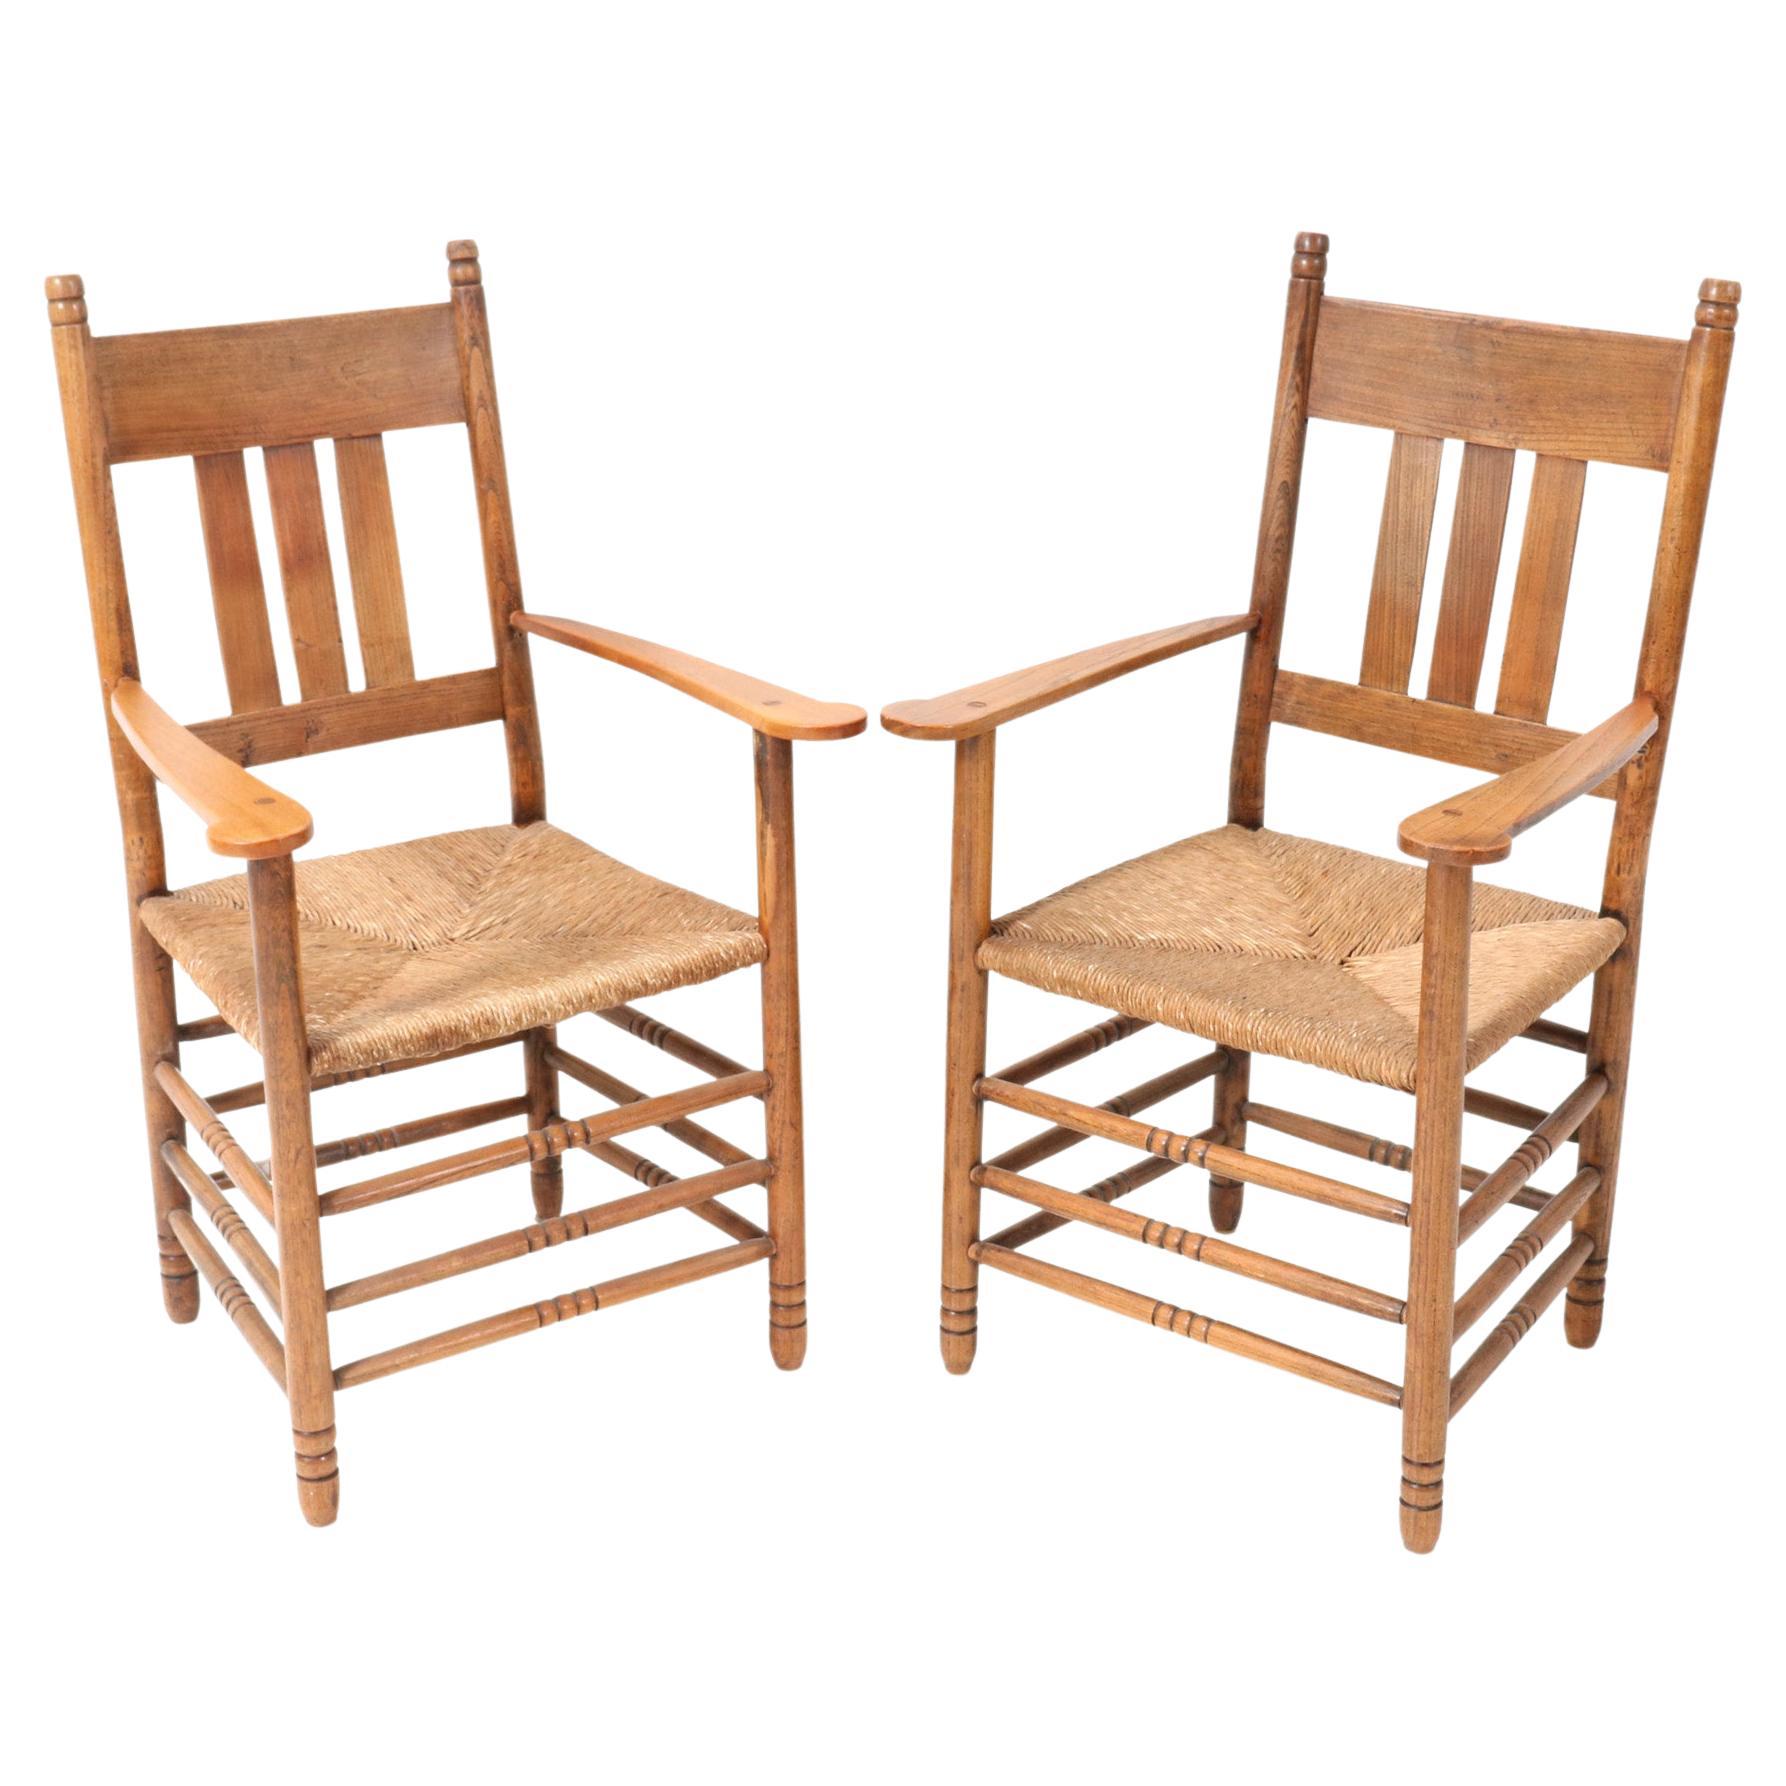 Two Elm Art Nouveau Armchairs by Willem Penaat, 1900s For Sale